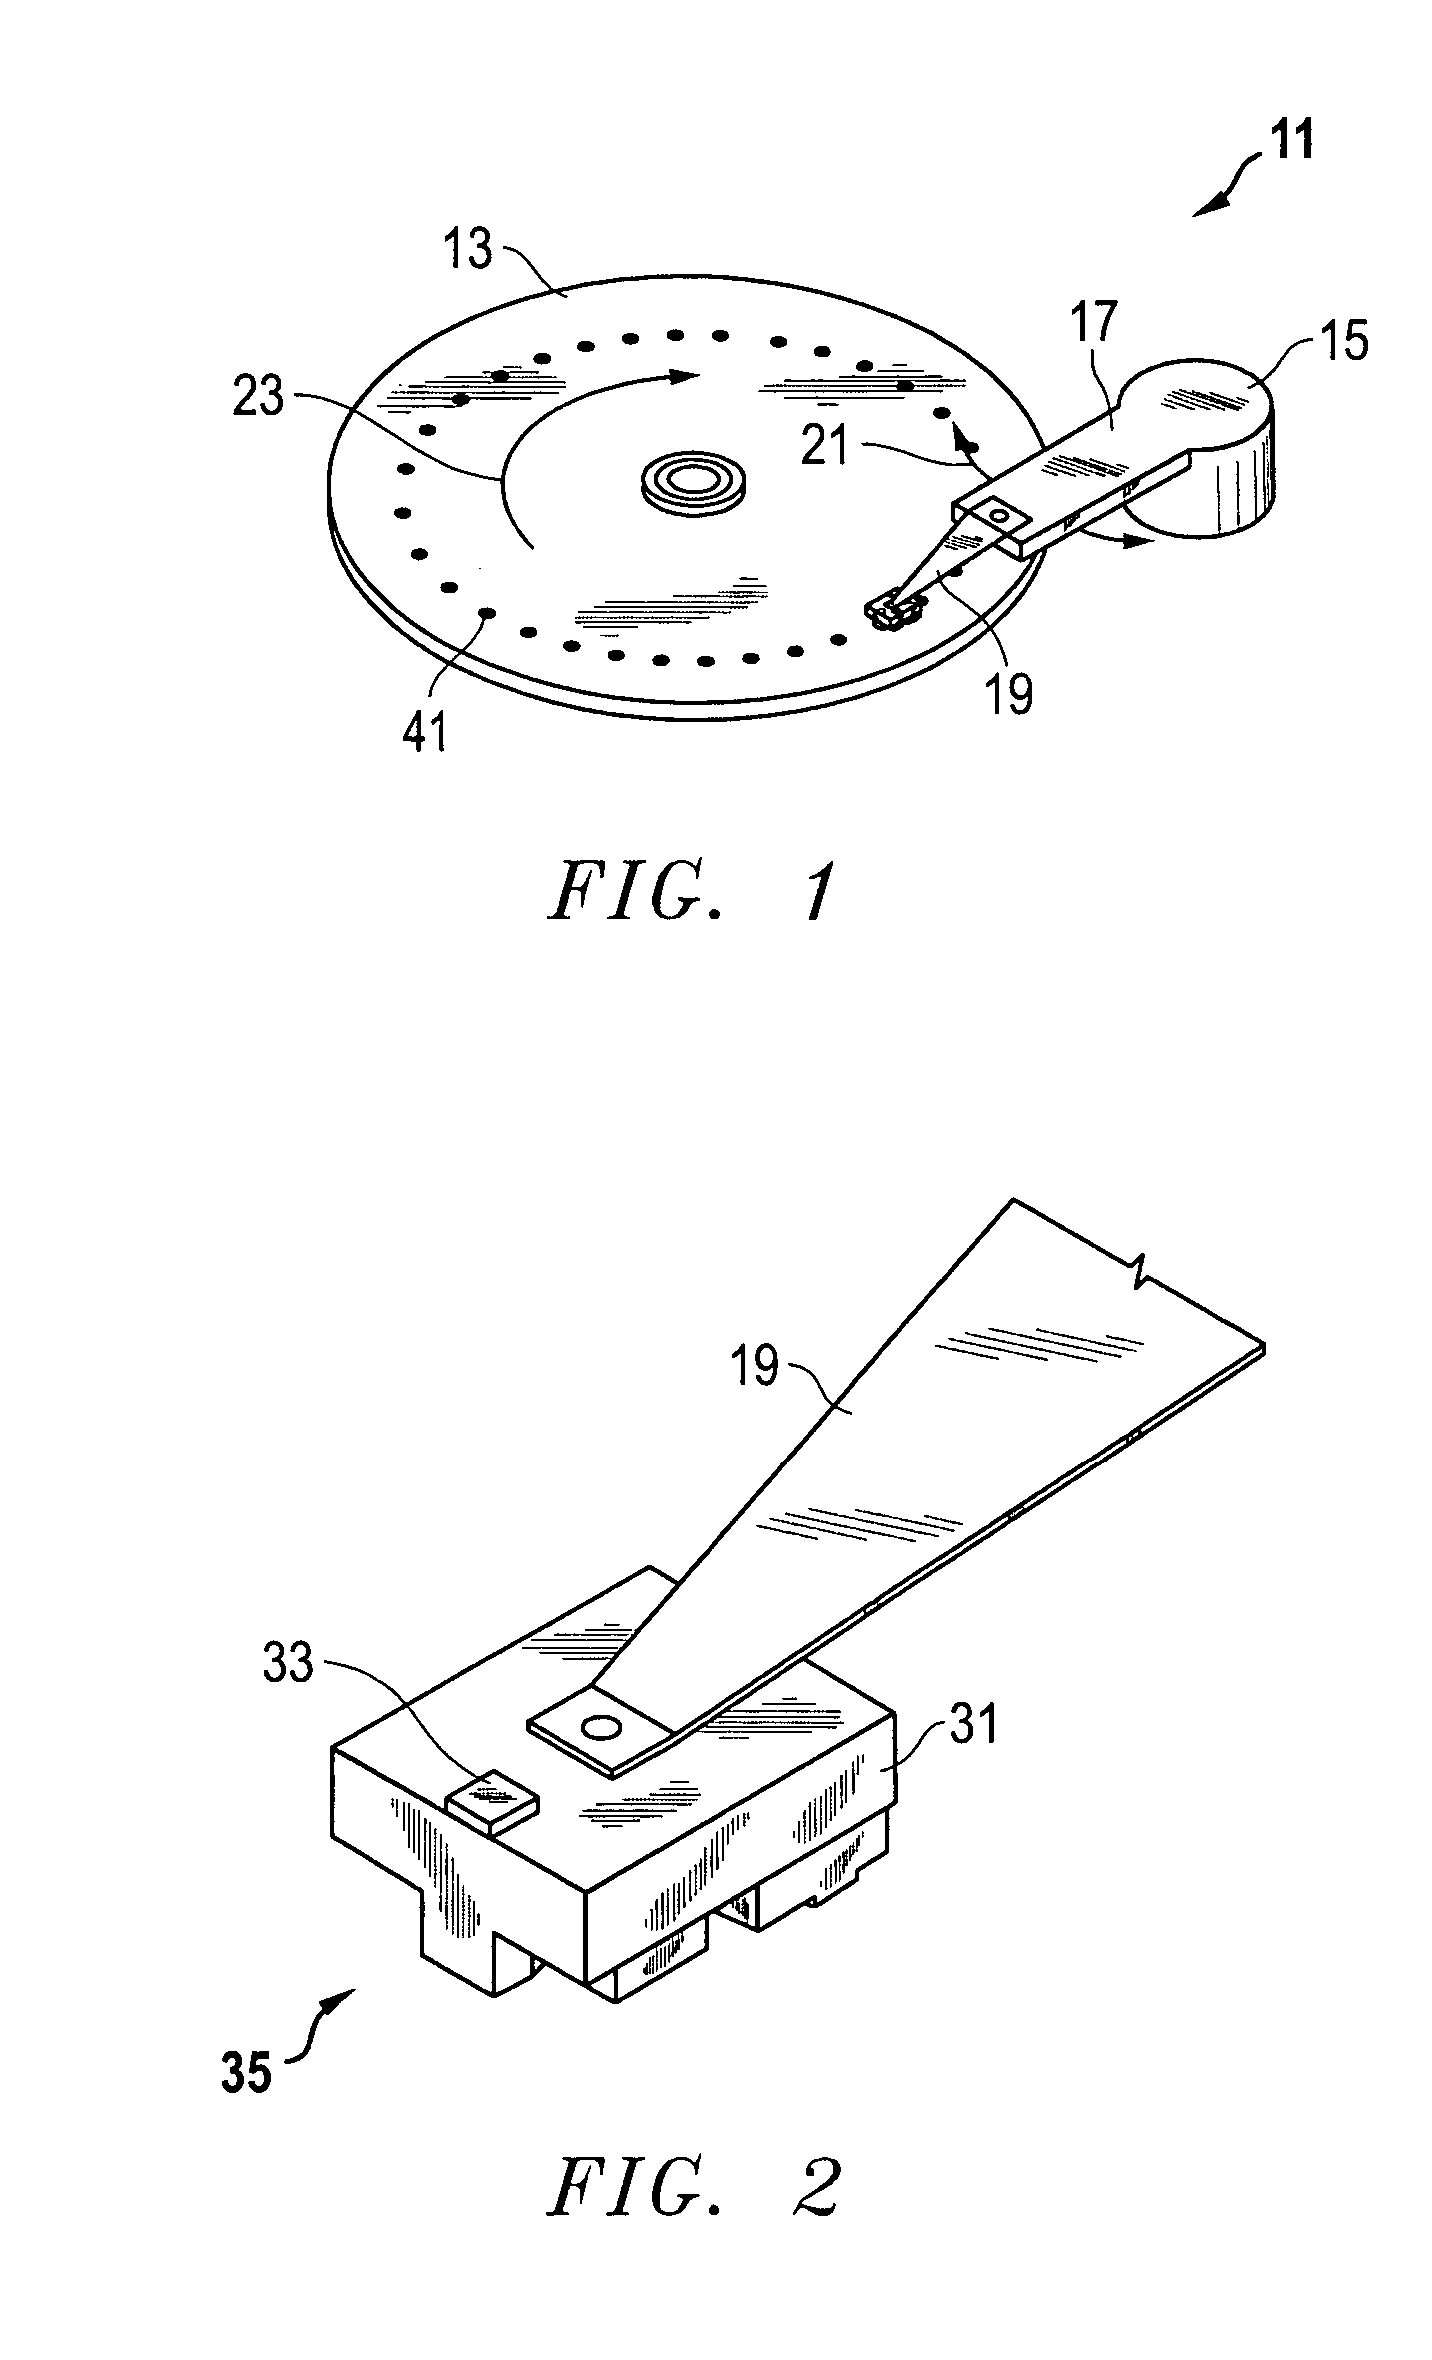 System, method, and apparatus for glide head calibration with enhanced PZT channel for very low qualification glide heights